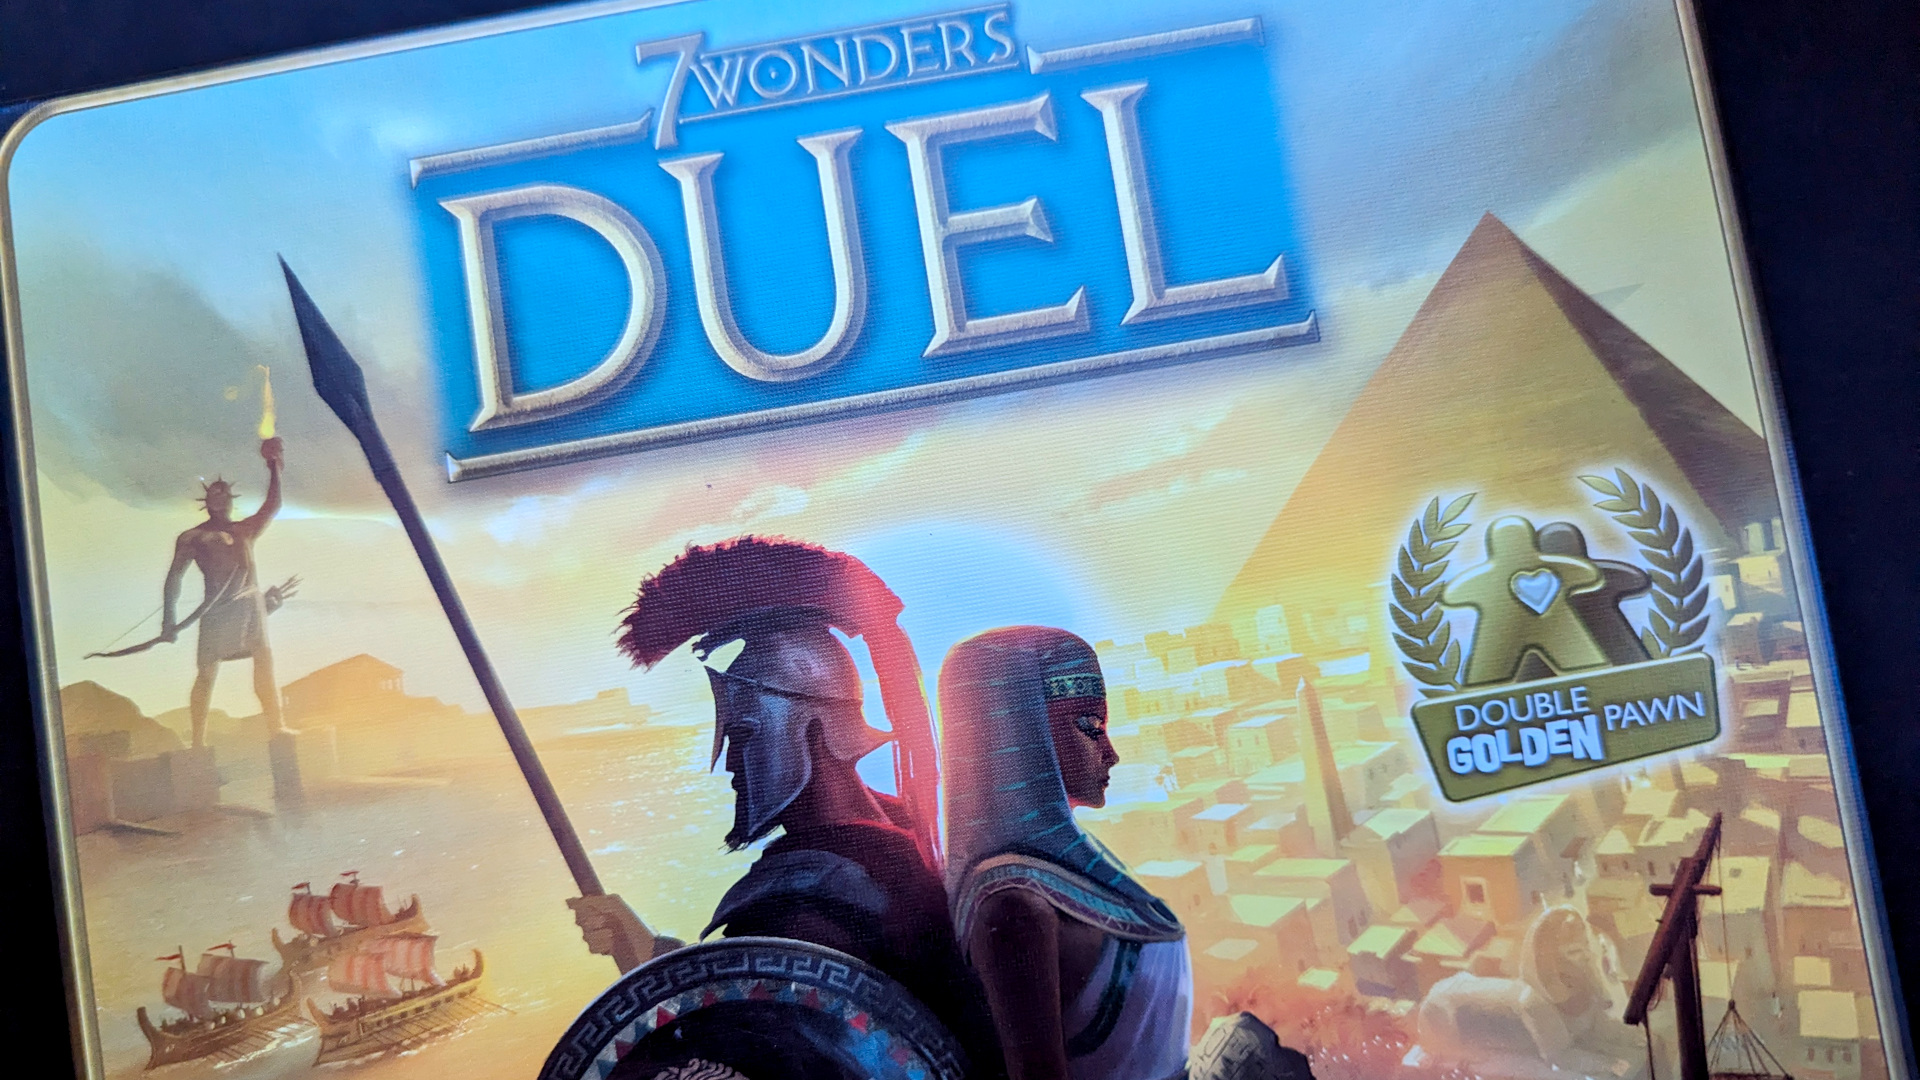 7 Wonders Duel review - author photo showing the game's front box art